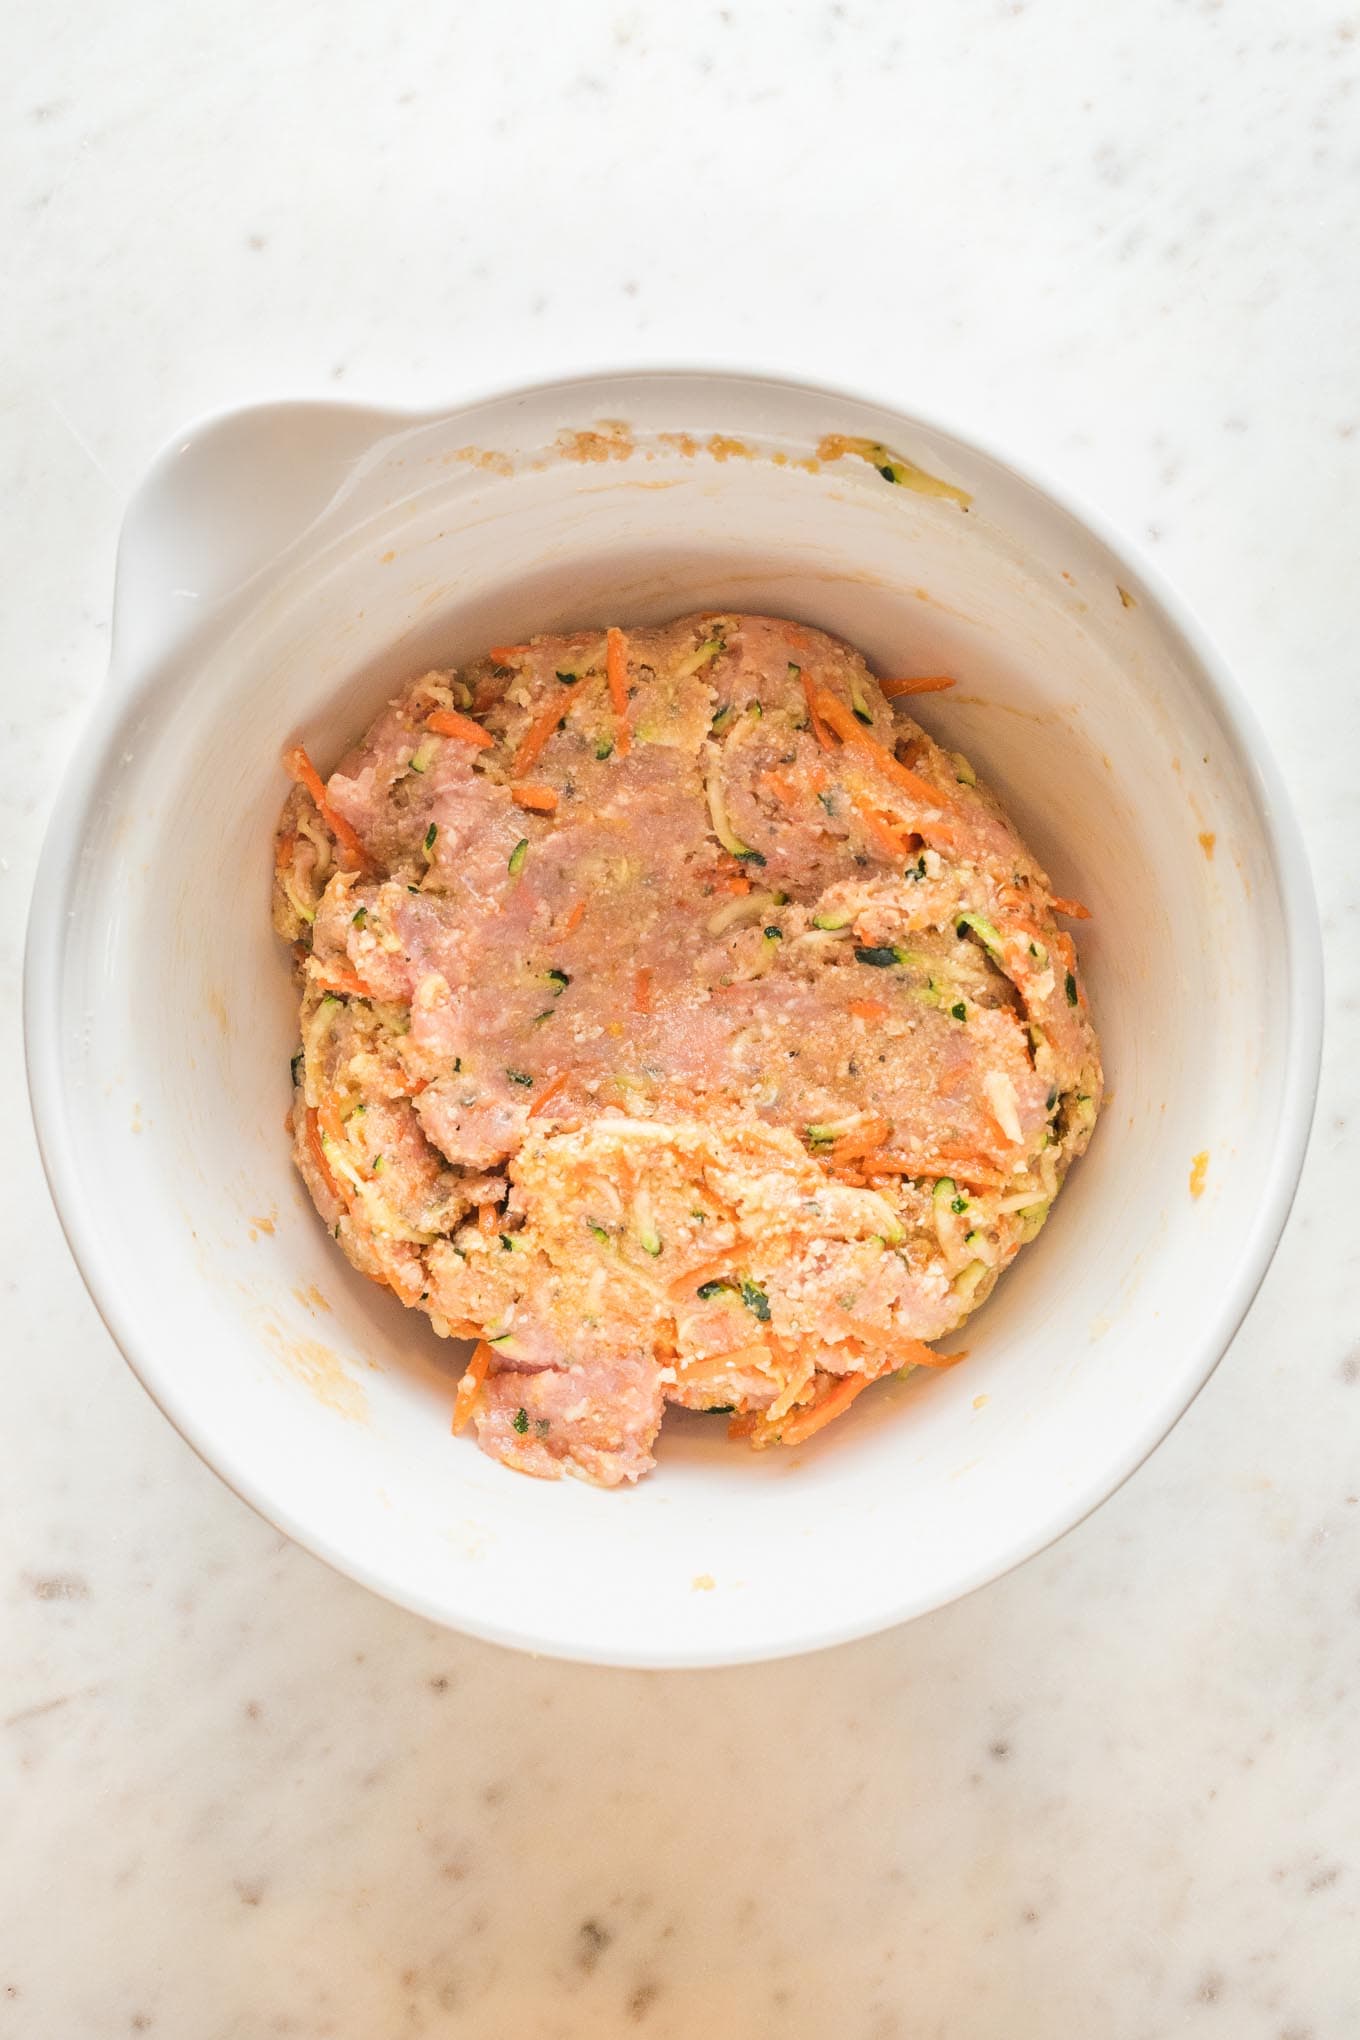 Mixture for baked turkey meatballs combined in a prep bowl.